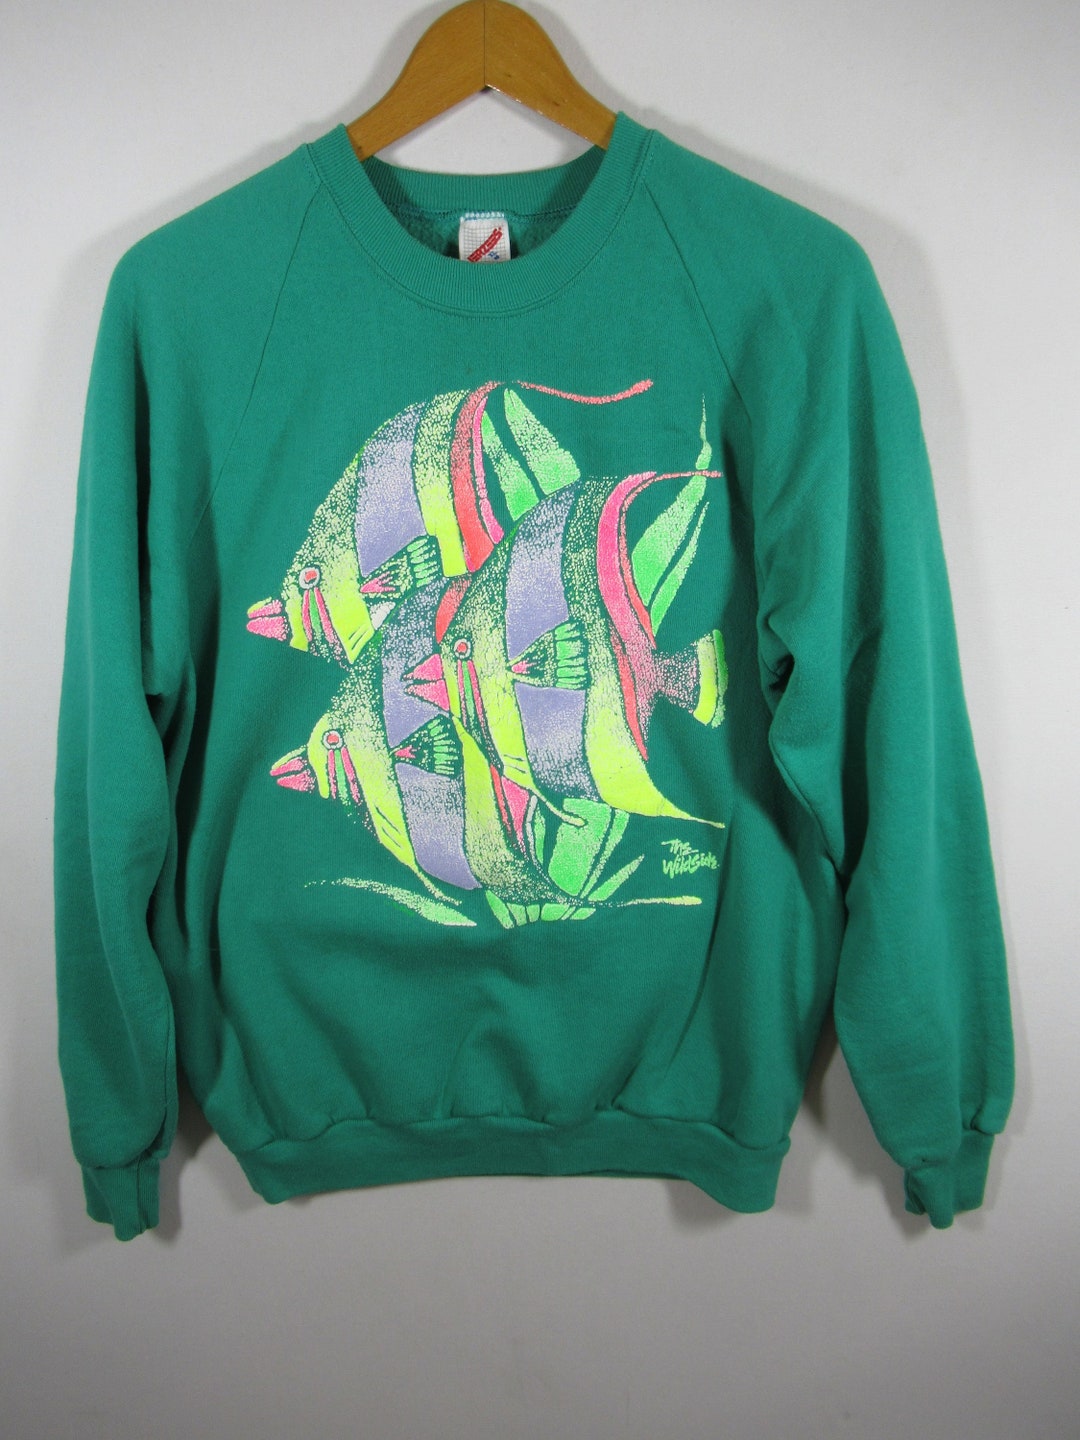 Vintage 80s 90s Jerzees Neon Fish Print Wild Side Pullover - Etsy